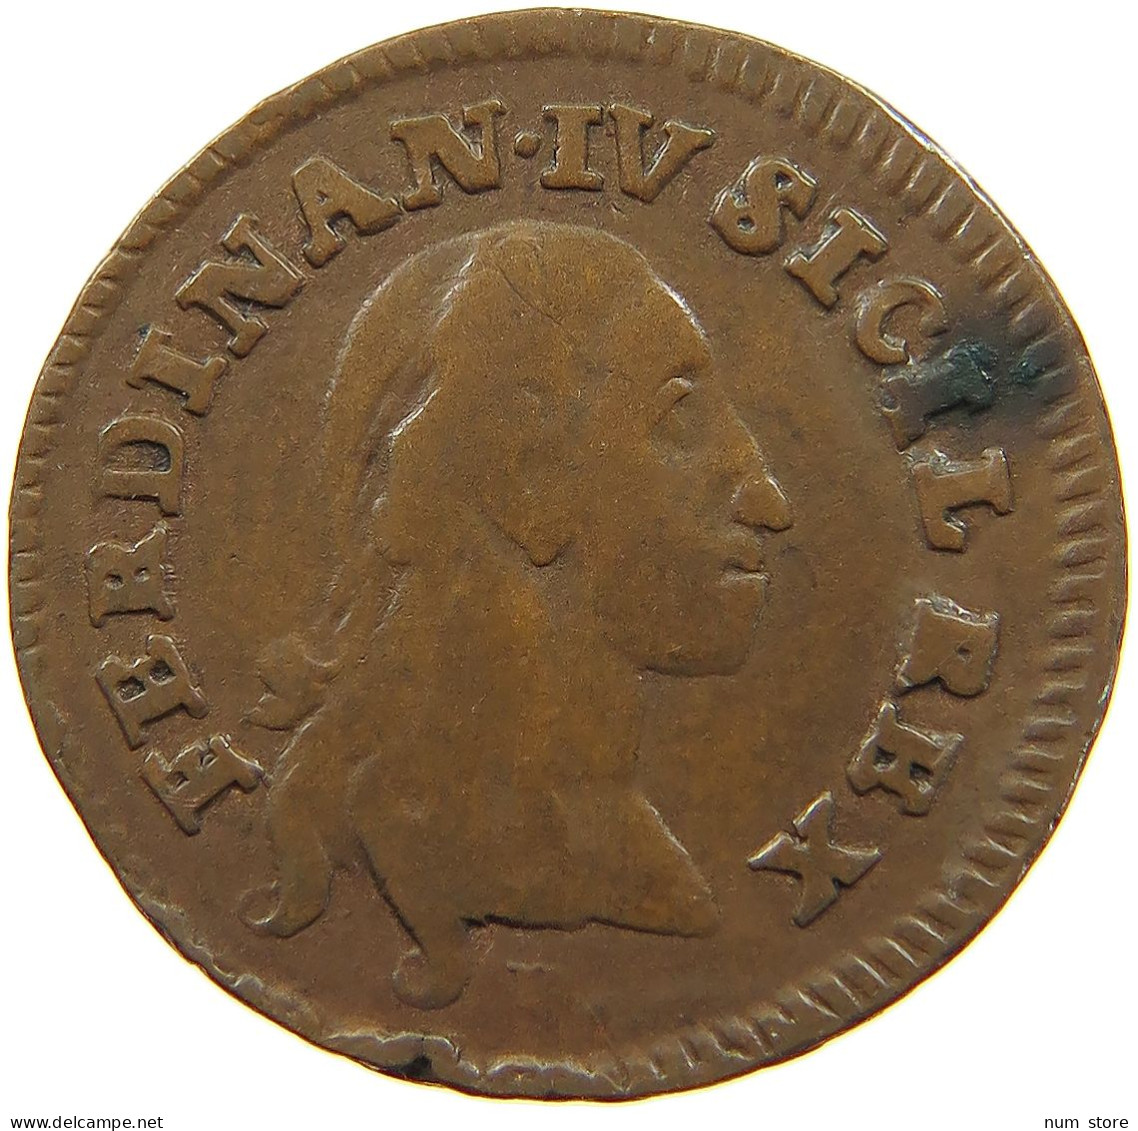 ITALY STATES NAPLES TORNESE 1790  #t100 0547 - Neapel & Sizilien